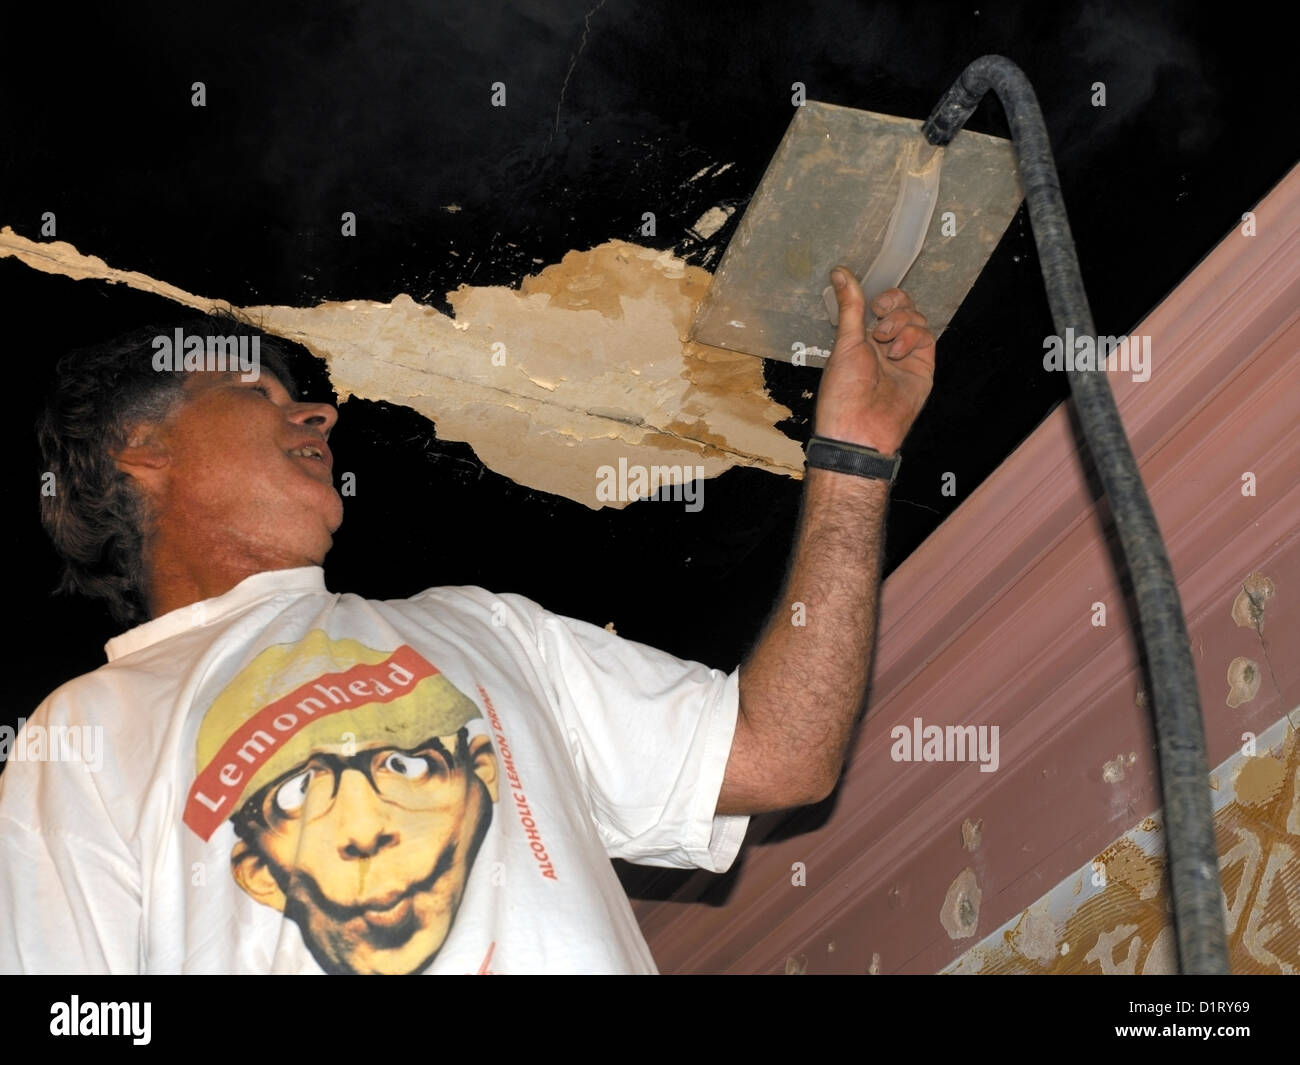 Man Using Steamer on Ceiling and Wearing T-Shirt with Lemonhead Stock Photo